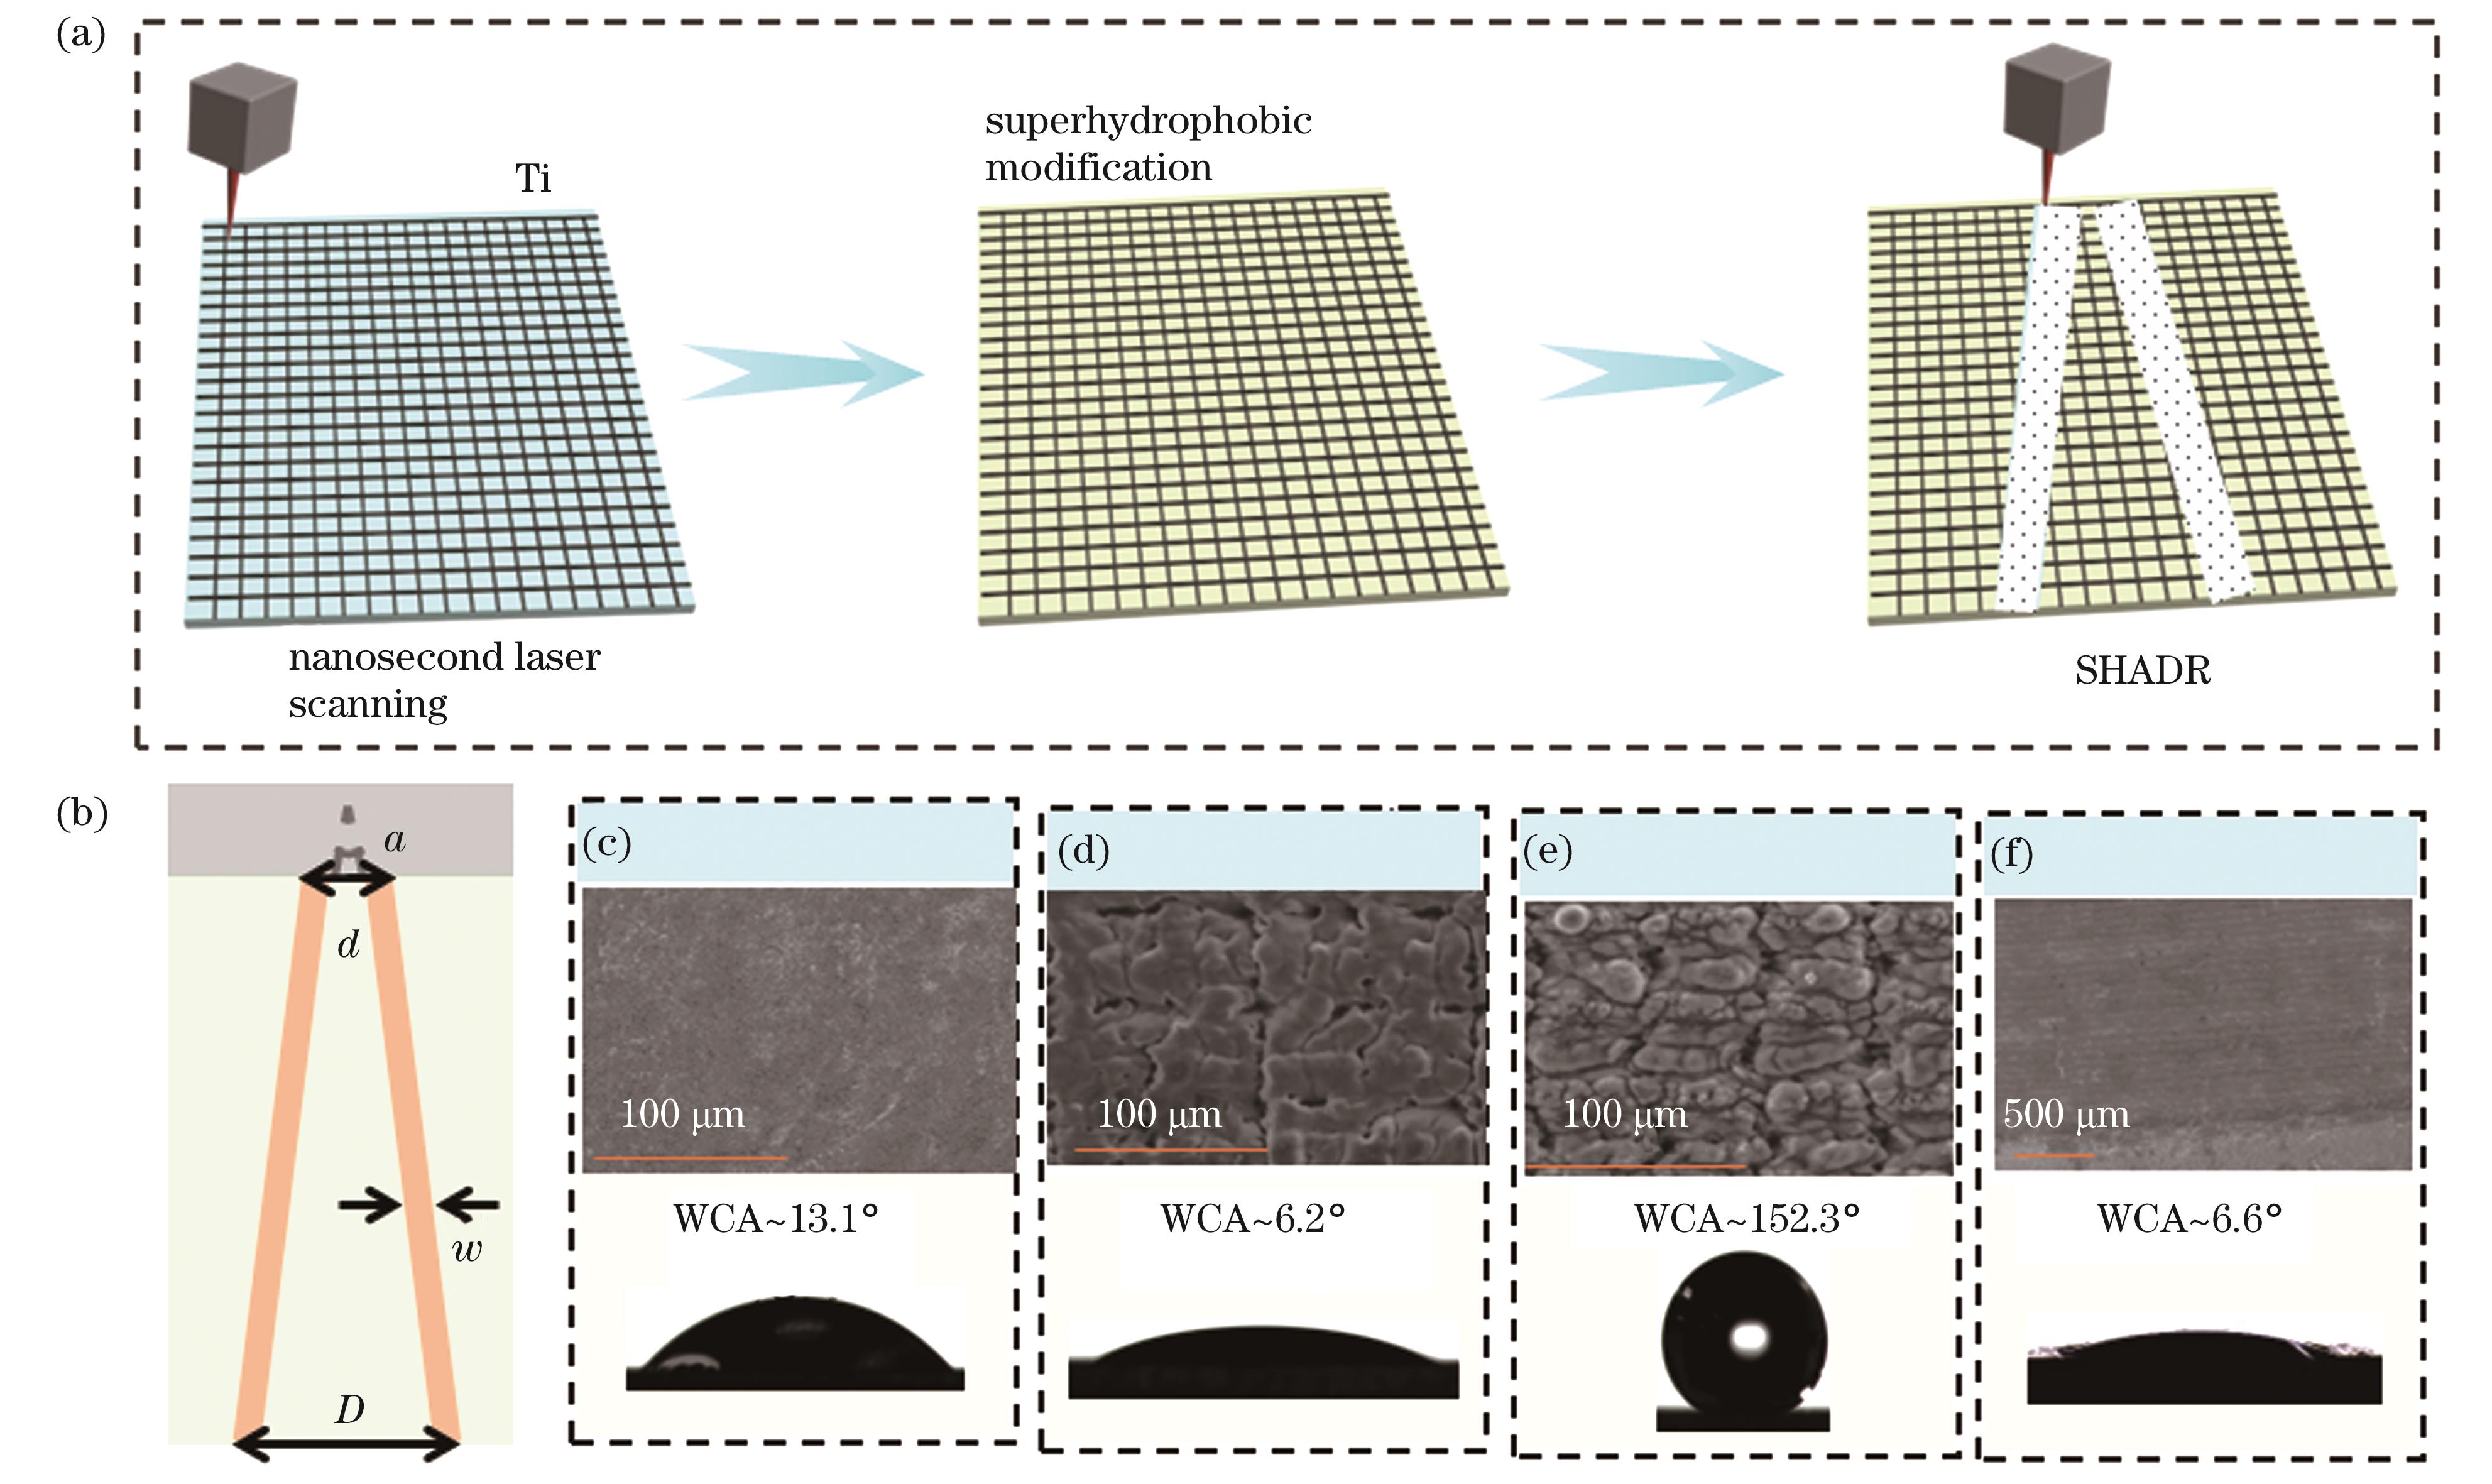 Preparation process and morphology characterization of SHADR structure. (a) Preparation process of SHADR structure; (b) parameters of SHADR structure; (c) original Ti surface and wettability; (d) Ti surface and wettability after laser machining; (e) Ti surface and wettability after superhydrophobic modification; (f) SHADR surface and wettability